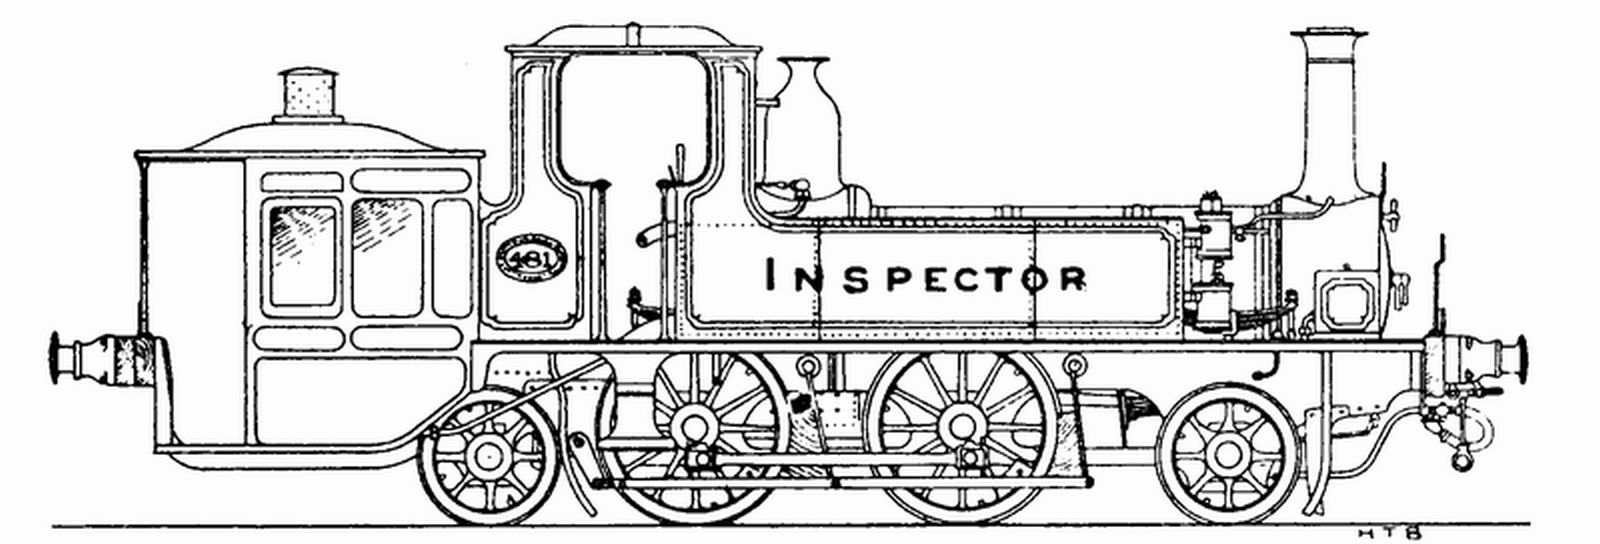 Schematic drawing after the rebuild to No. 481 “Inspector”